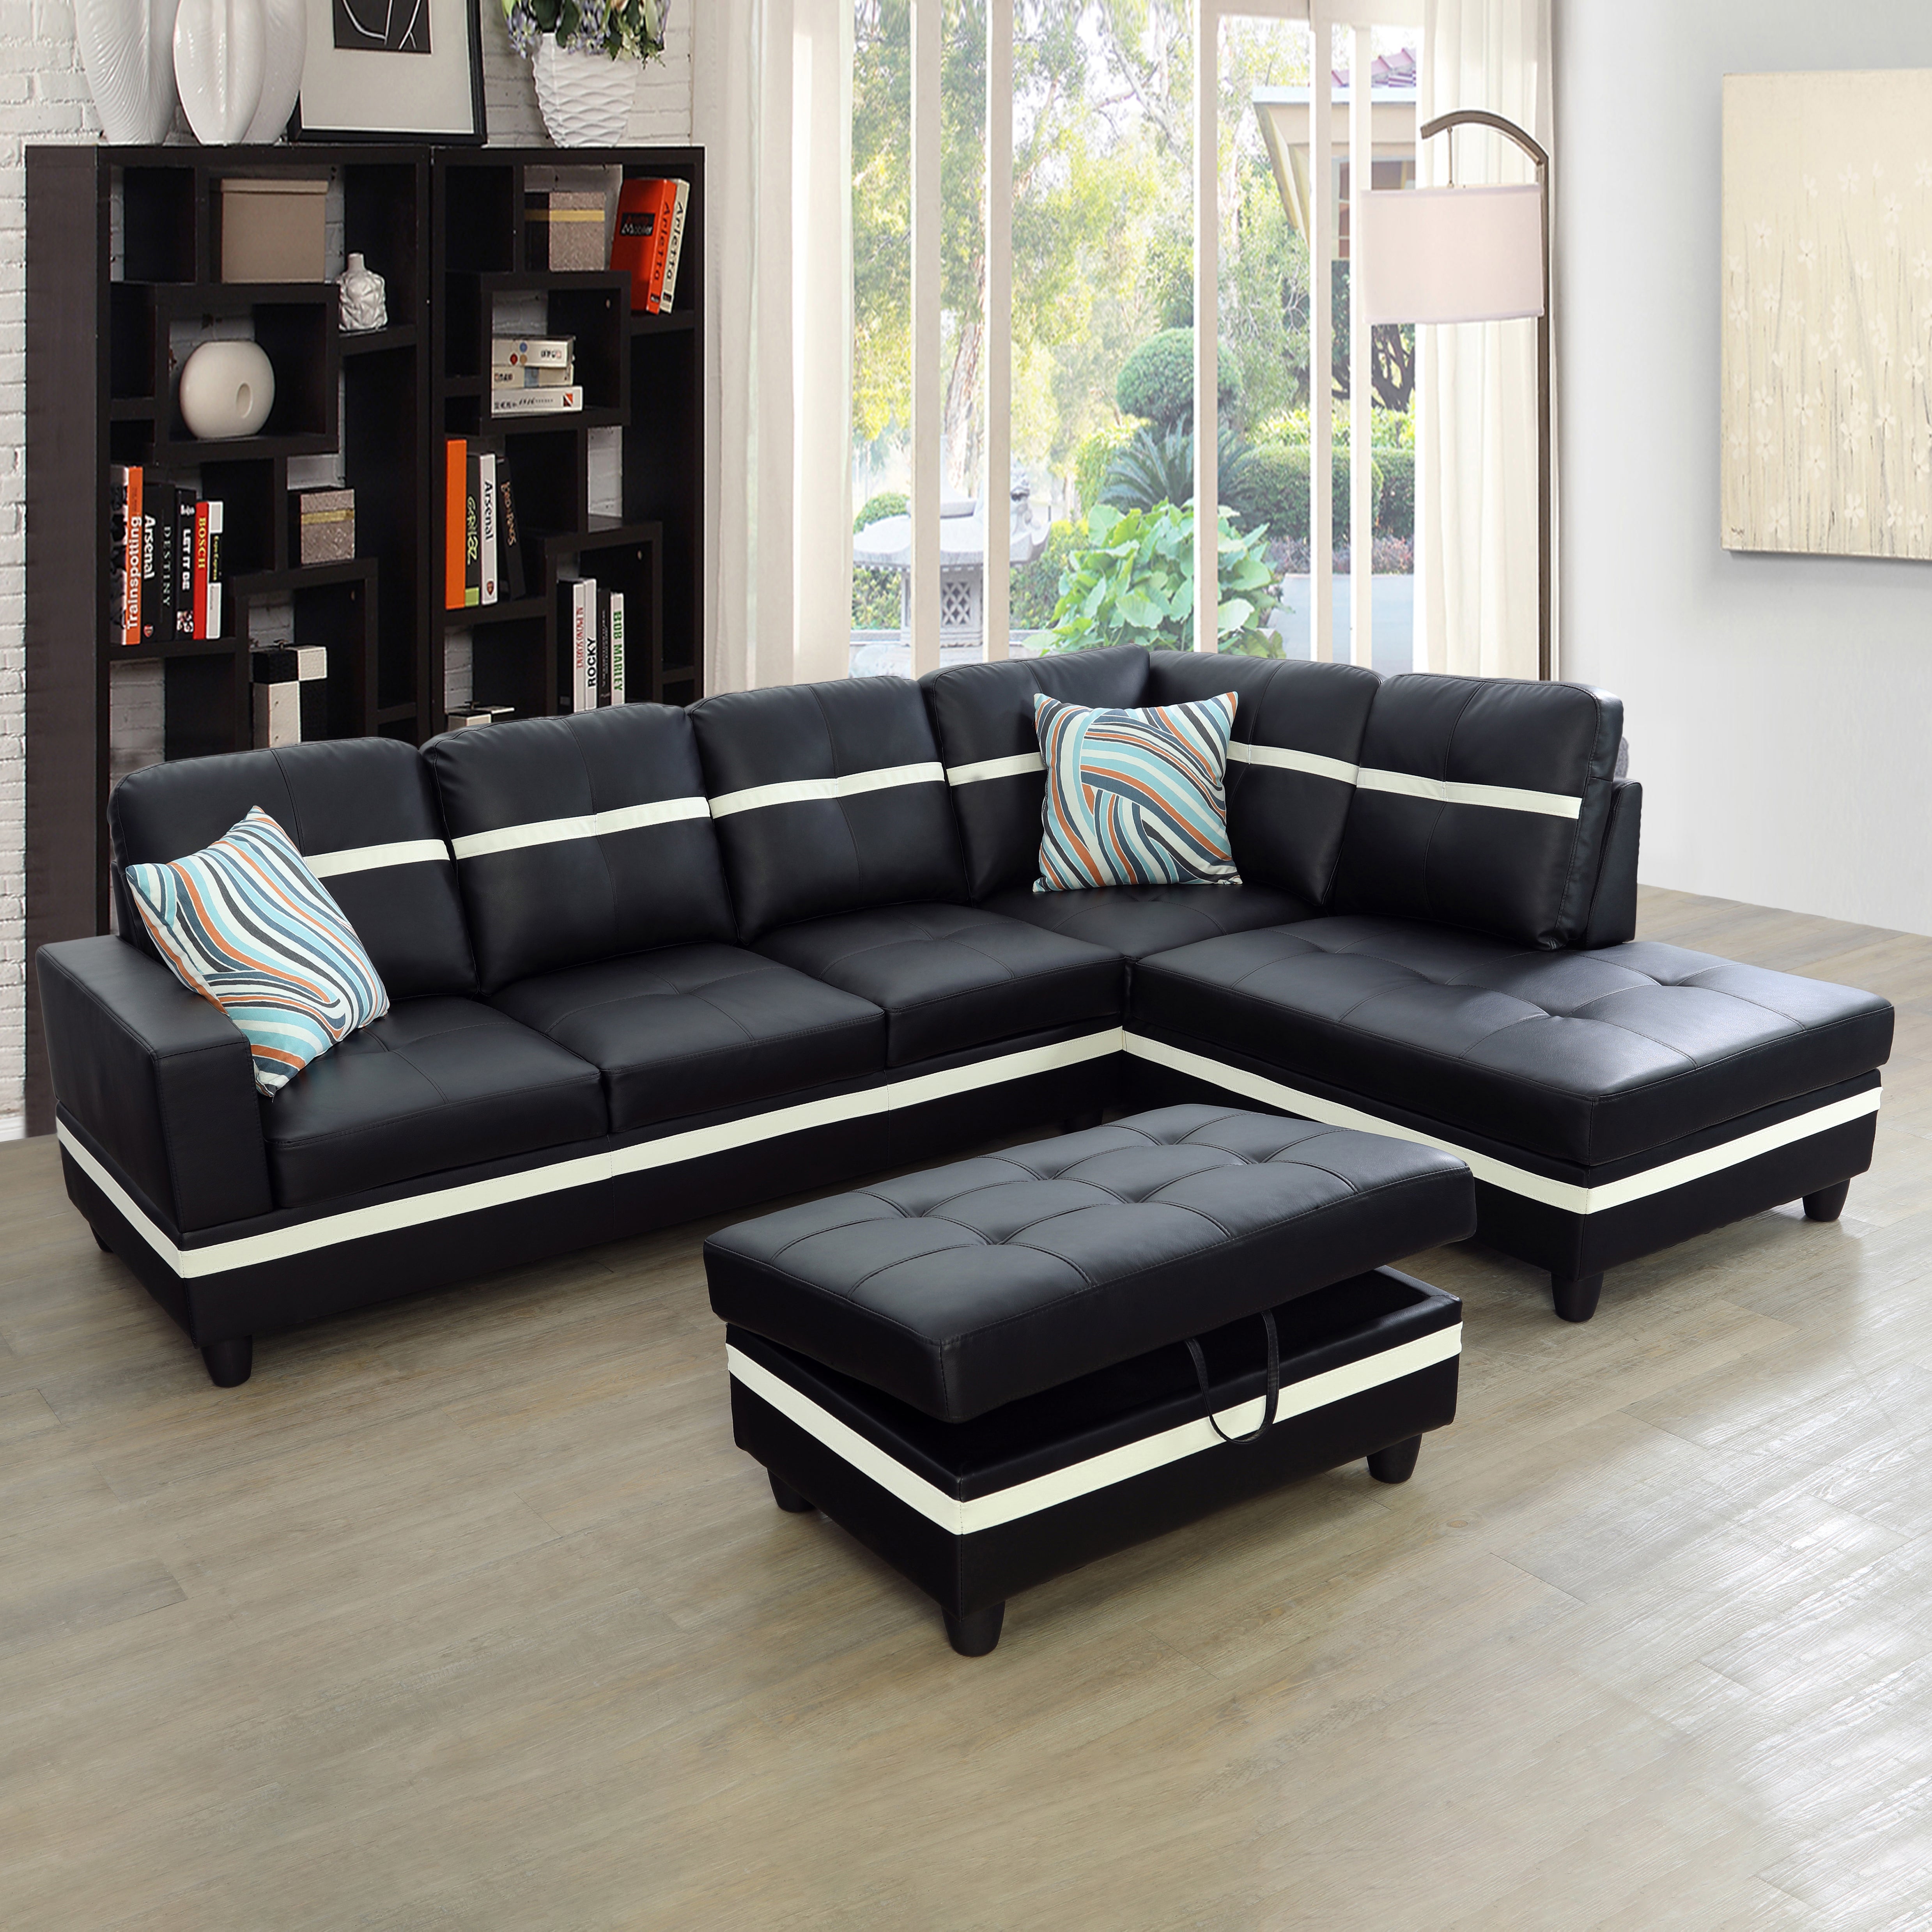 Ainehome Black And White Semi PU Synthetic Leather 3-Piece Couch Living Room Sofa Set